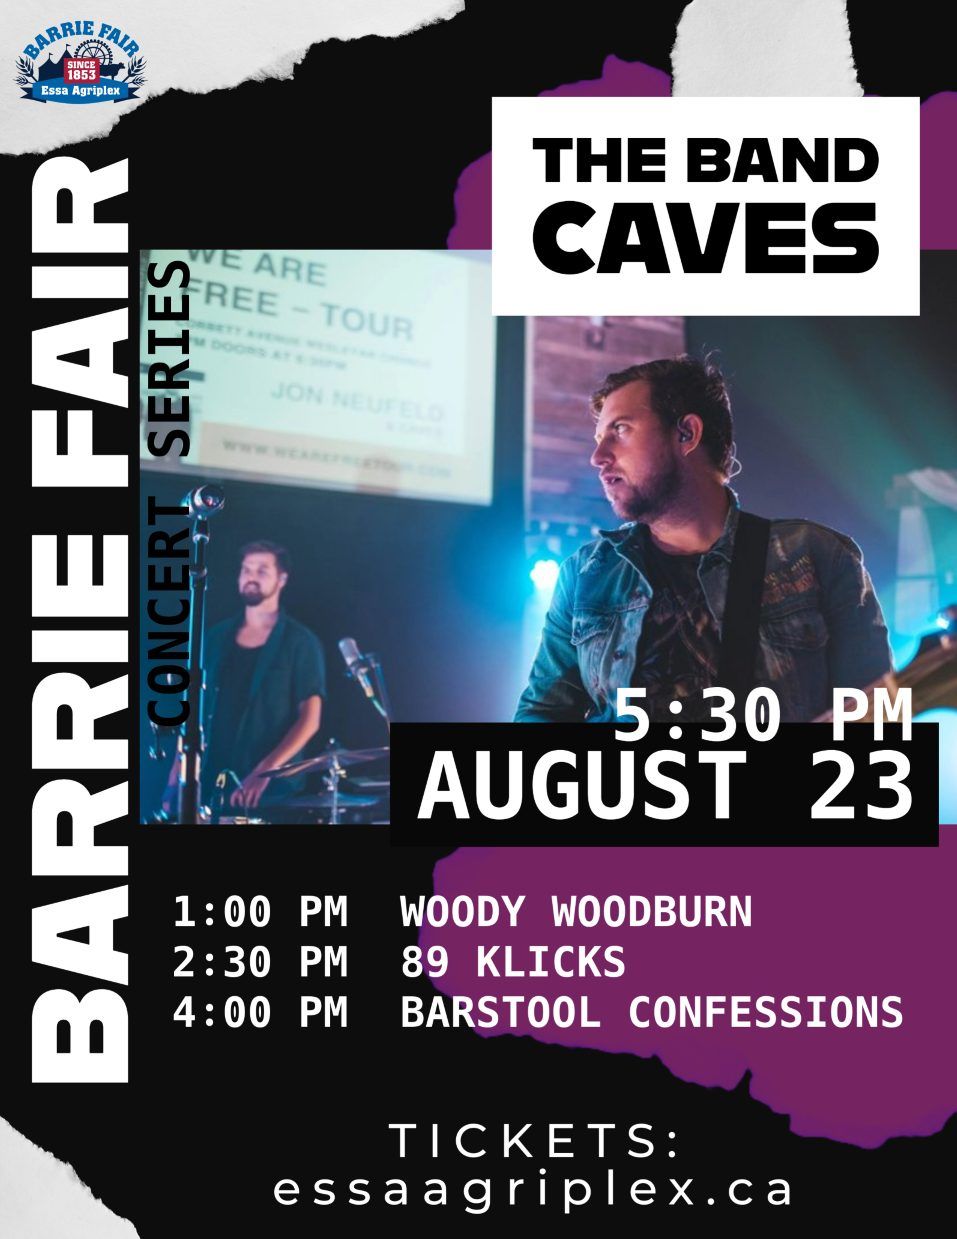 The Band Caves | BARRIE FAIR CONCERT SERIES | Woody Woodburn | 89 Klicks | Barstool Confessions